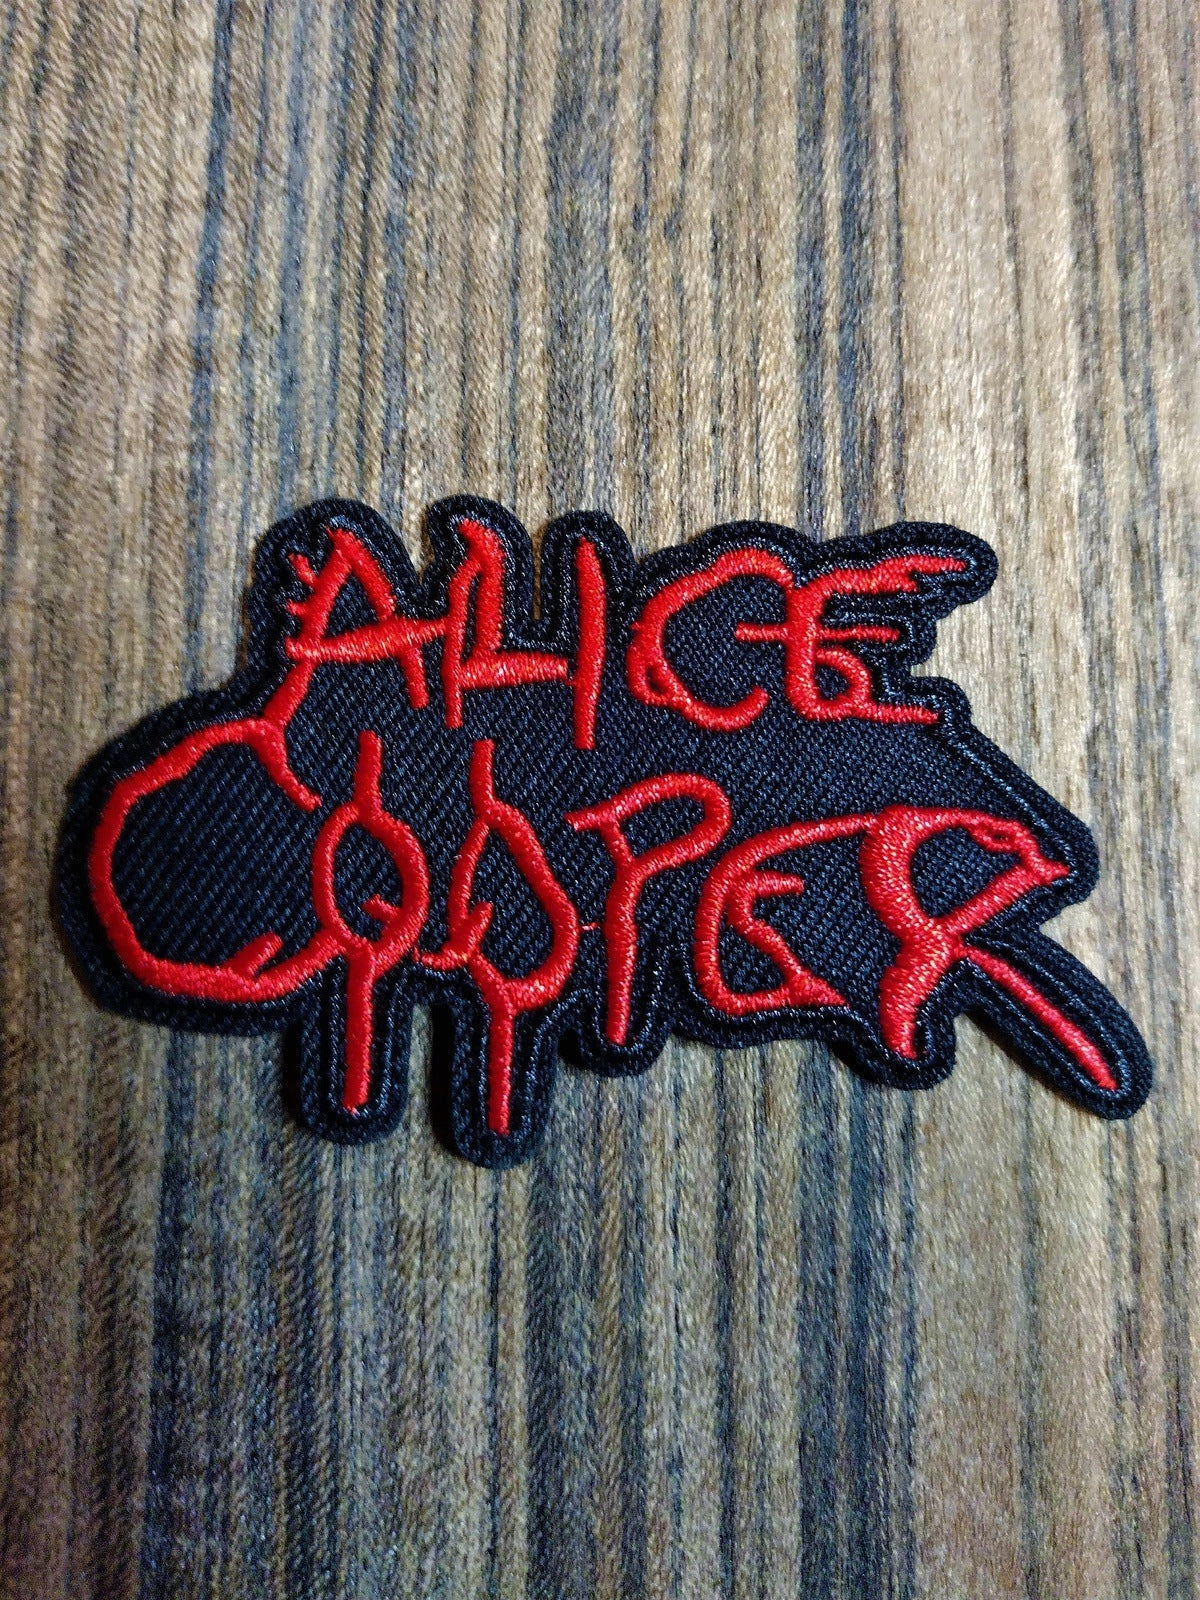 Alice Cooper Patch approx. 3 inches